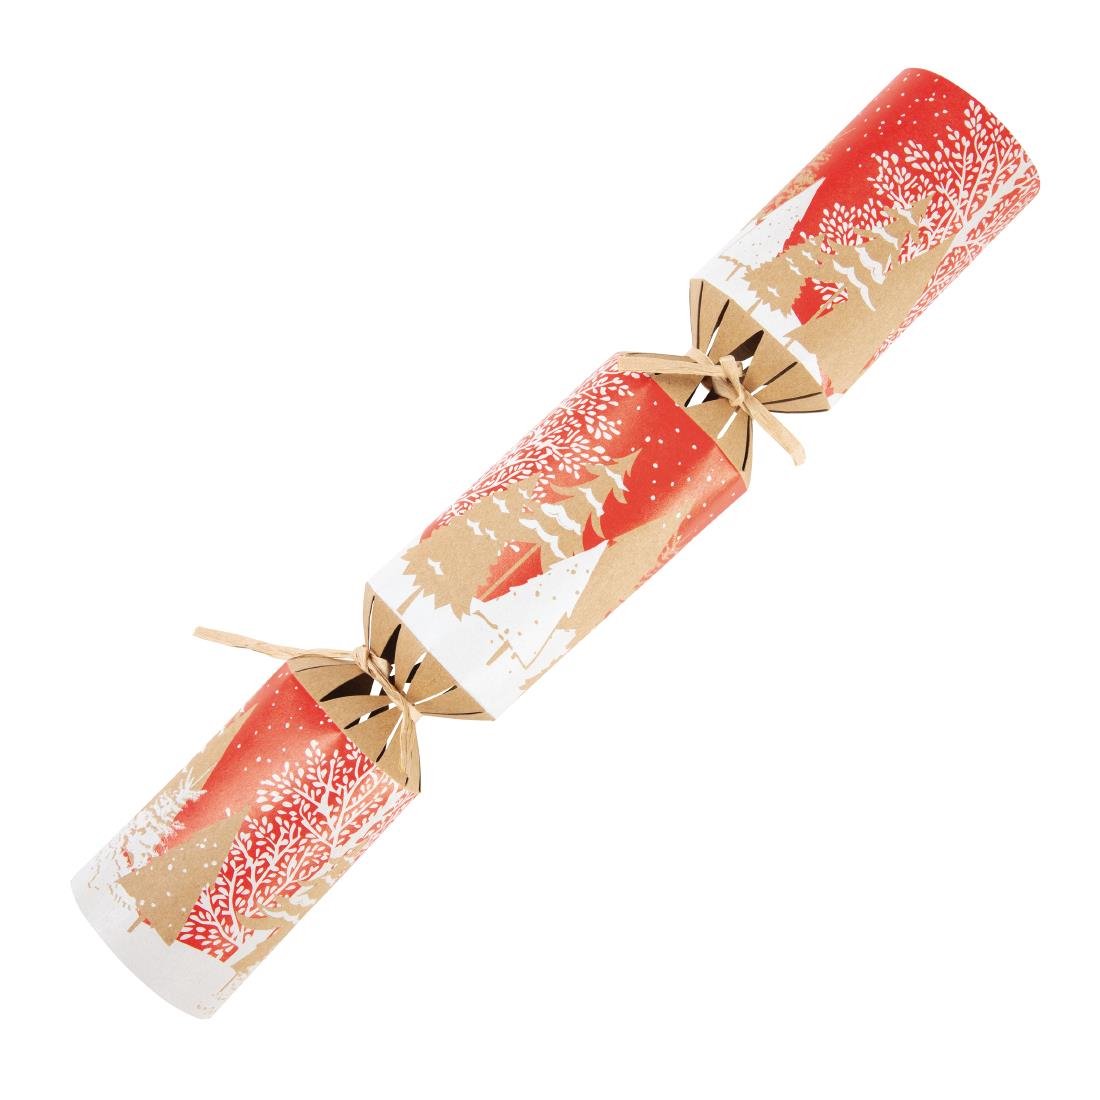 Winter's Tale 12" Plastic-Free Christmas Crackers